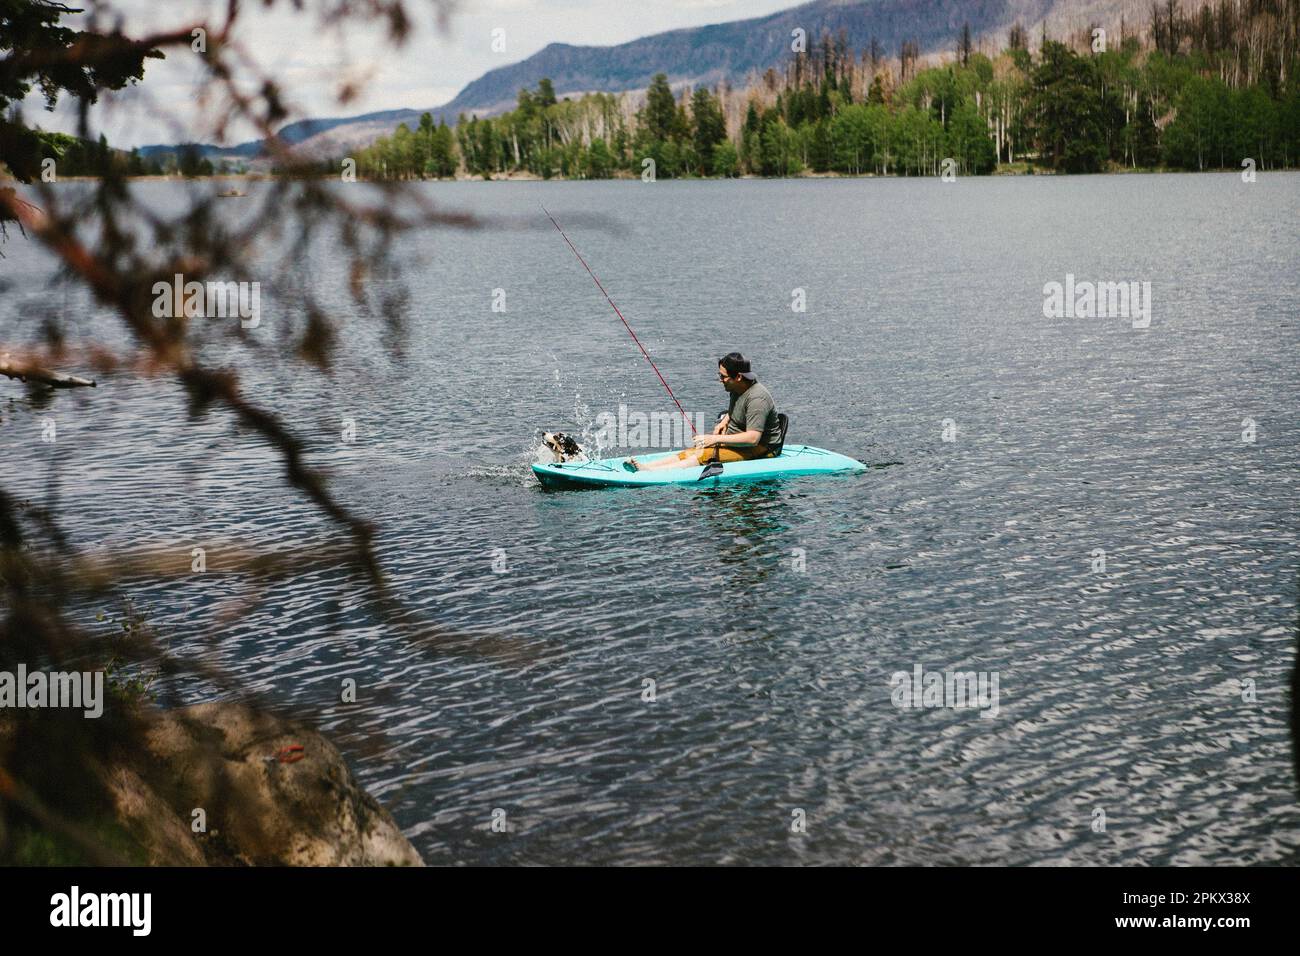 Man fishing in a kayak on a lake in mountains with dog Stock Photo